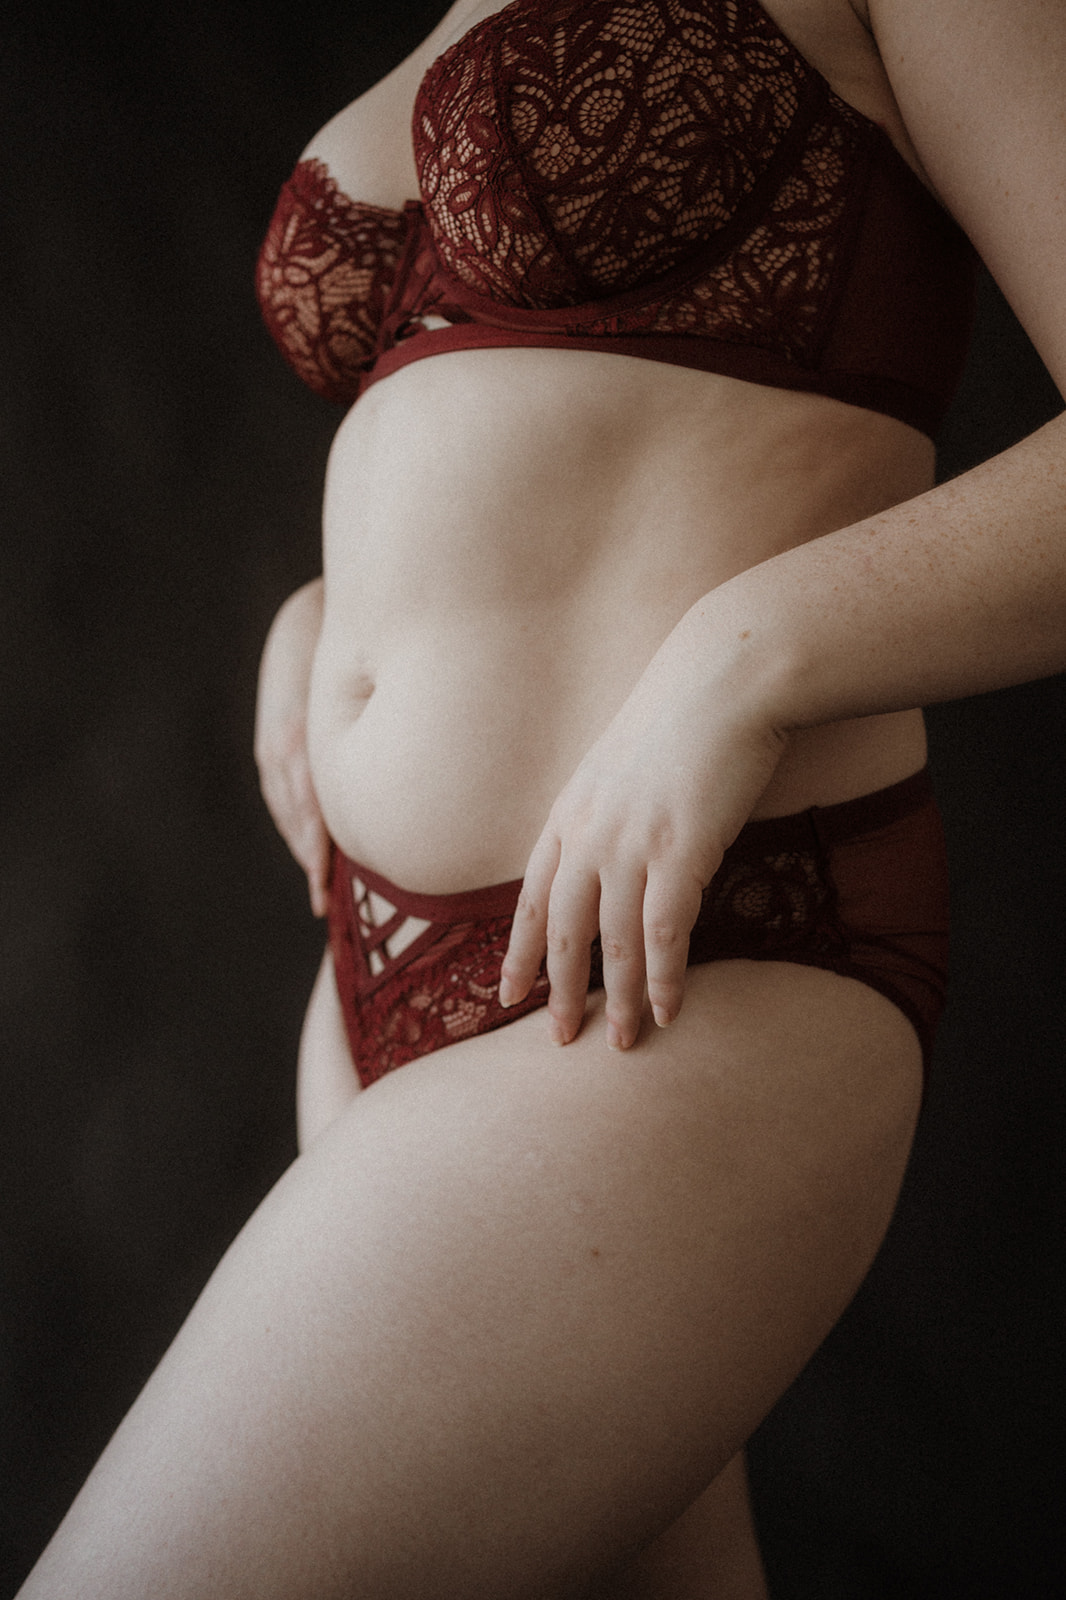 A woman wearing red Serasana lingerie stands with hands on her hips in a studio